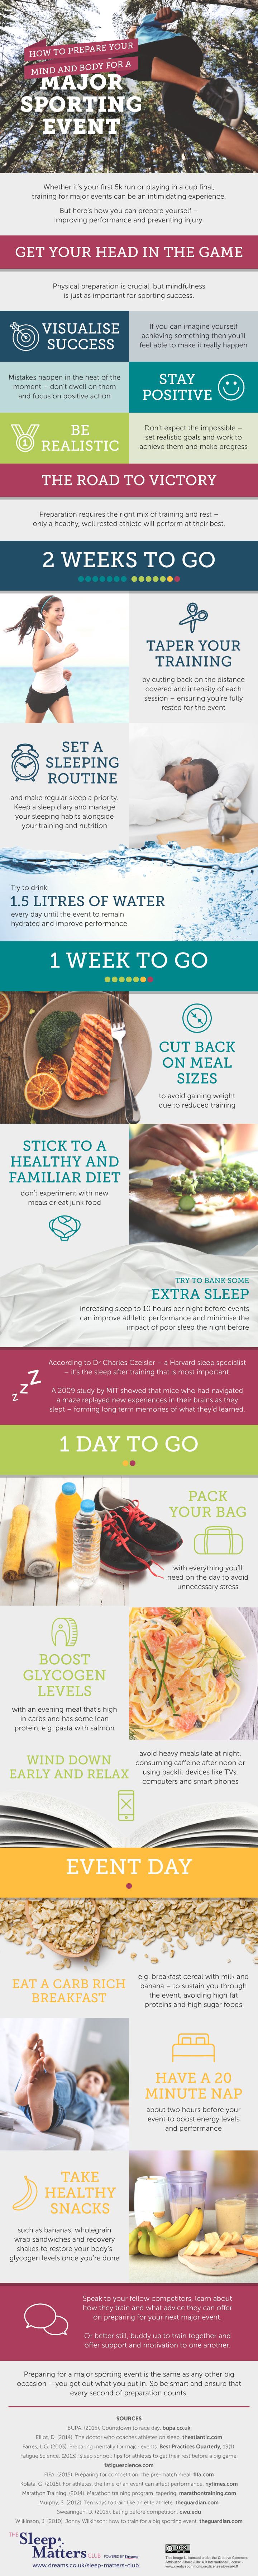 How To Prepare Yourself For a Major Sporting Event, an infographic from The Sleep Matters Club